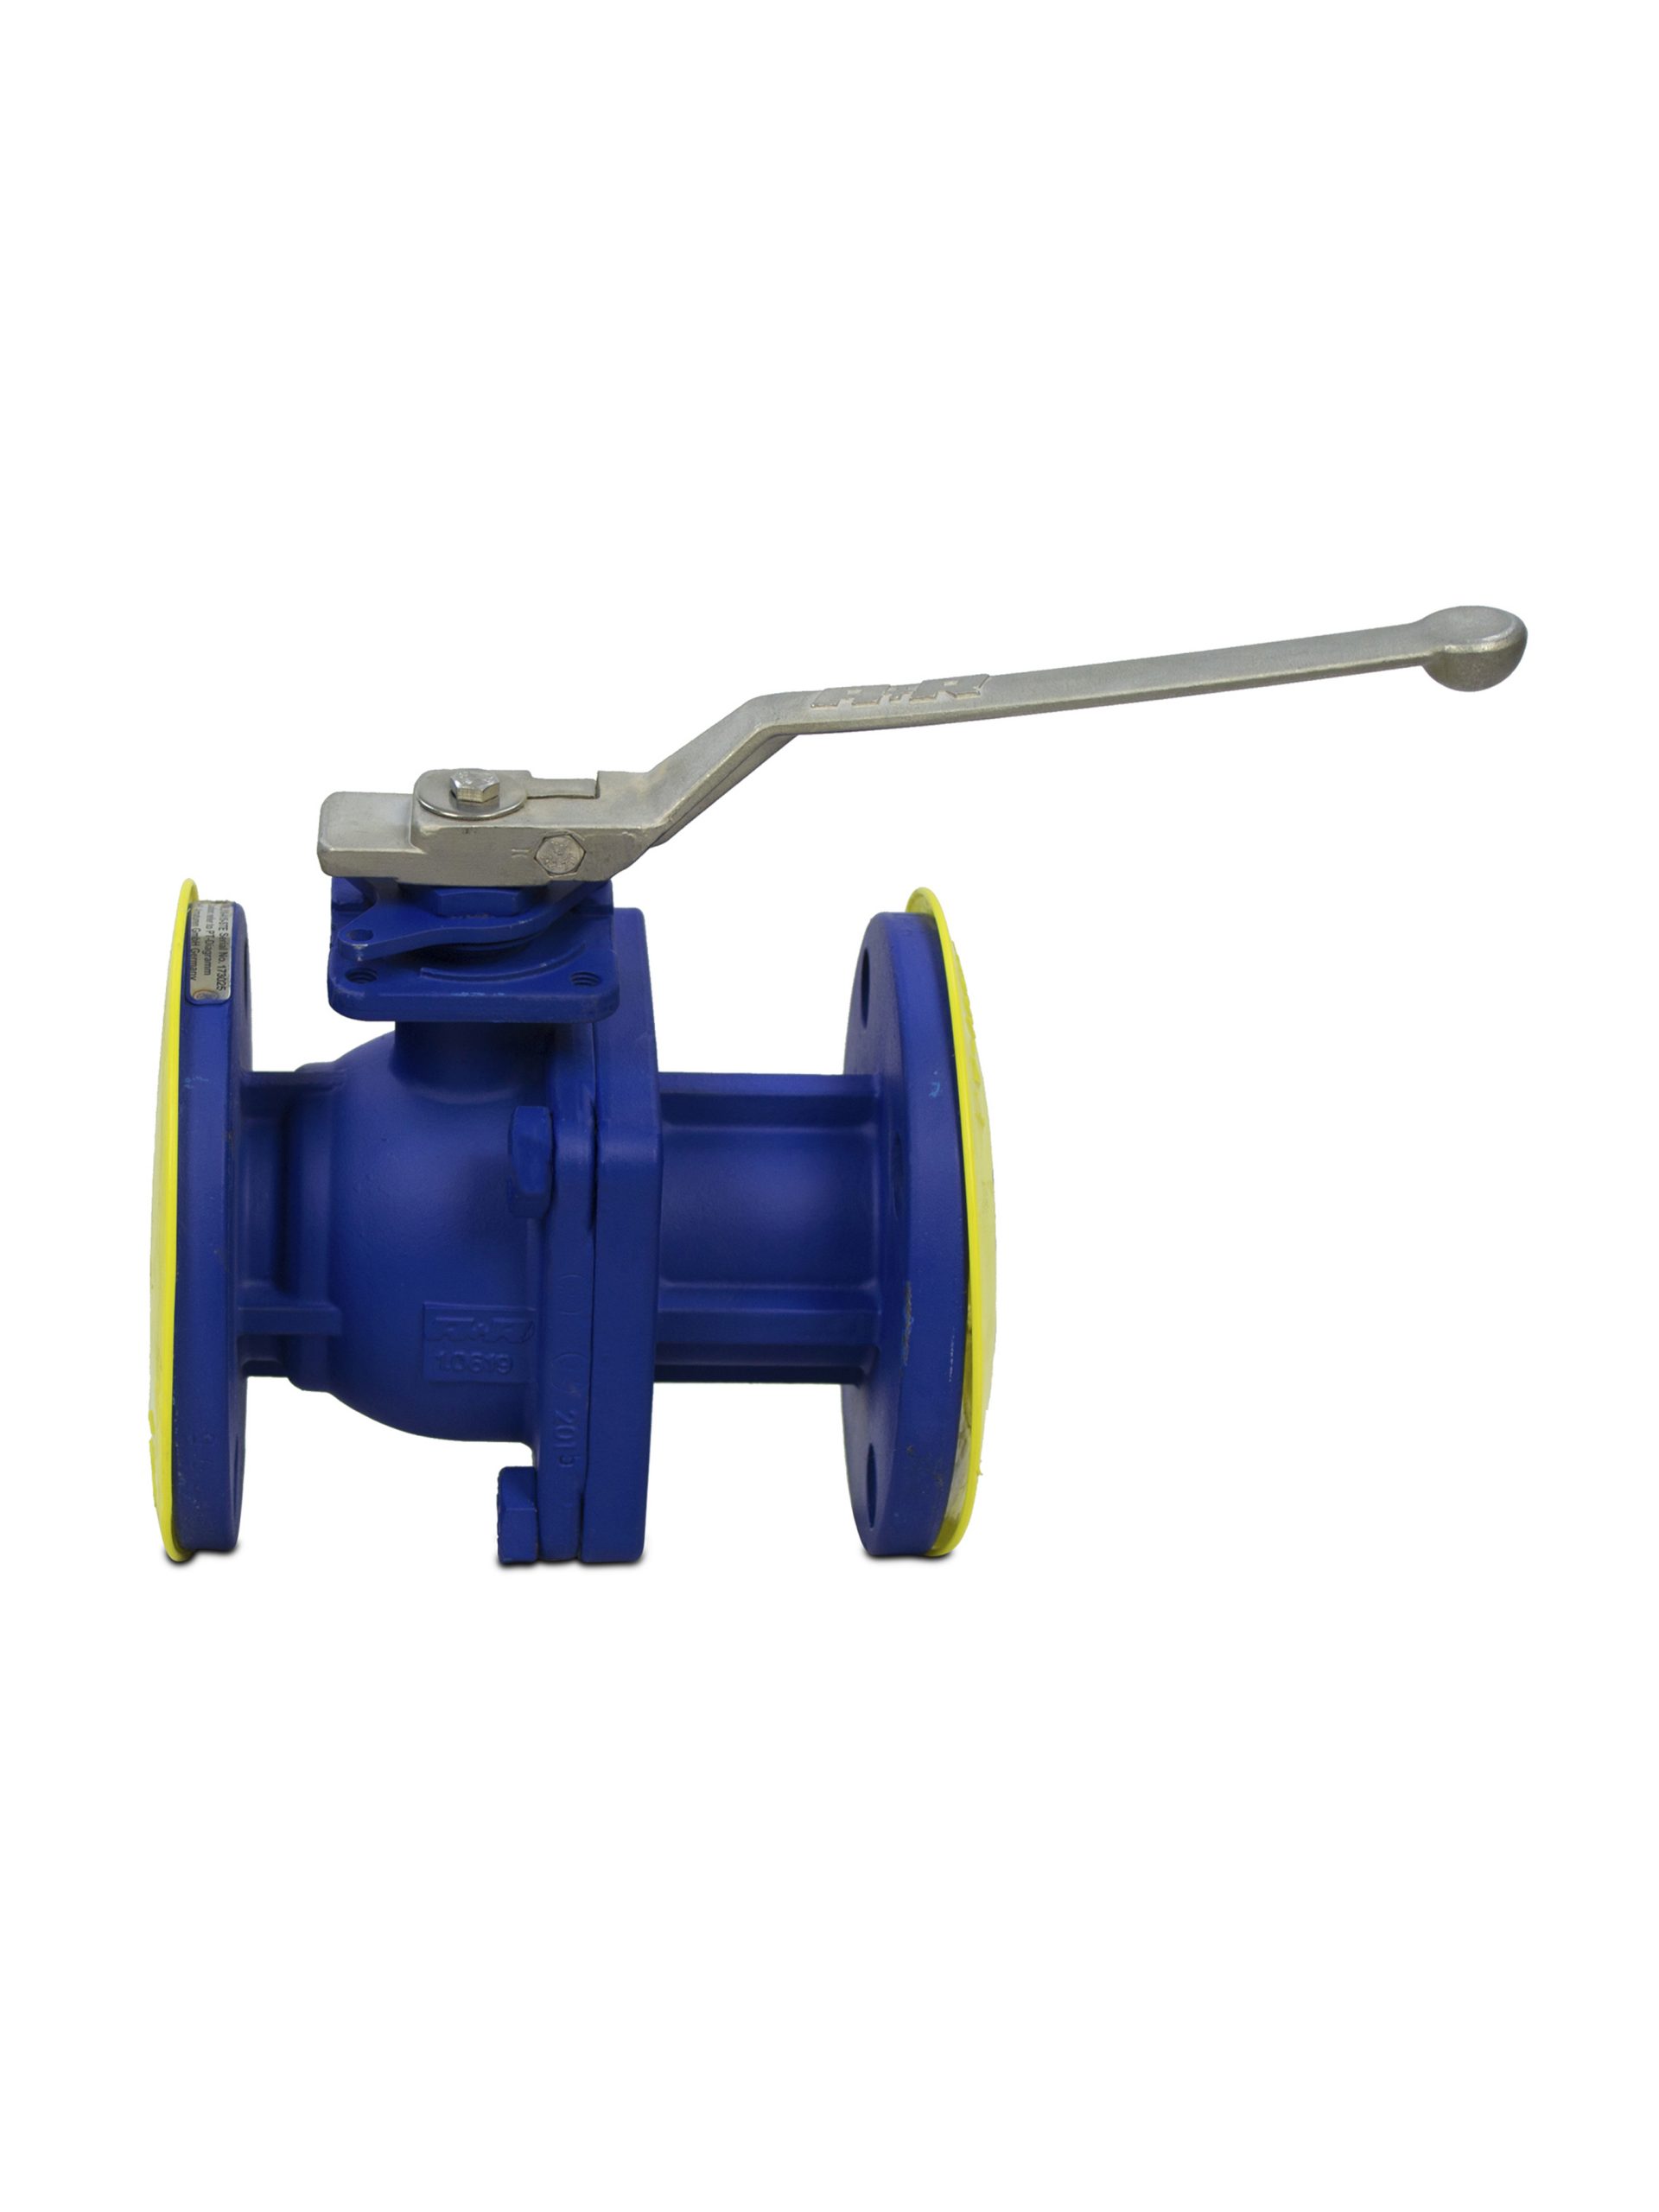 FLANGED BALL VALVE 2 INCHES in UAE